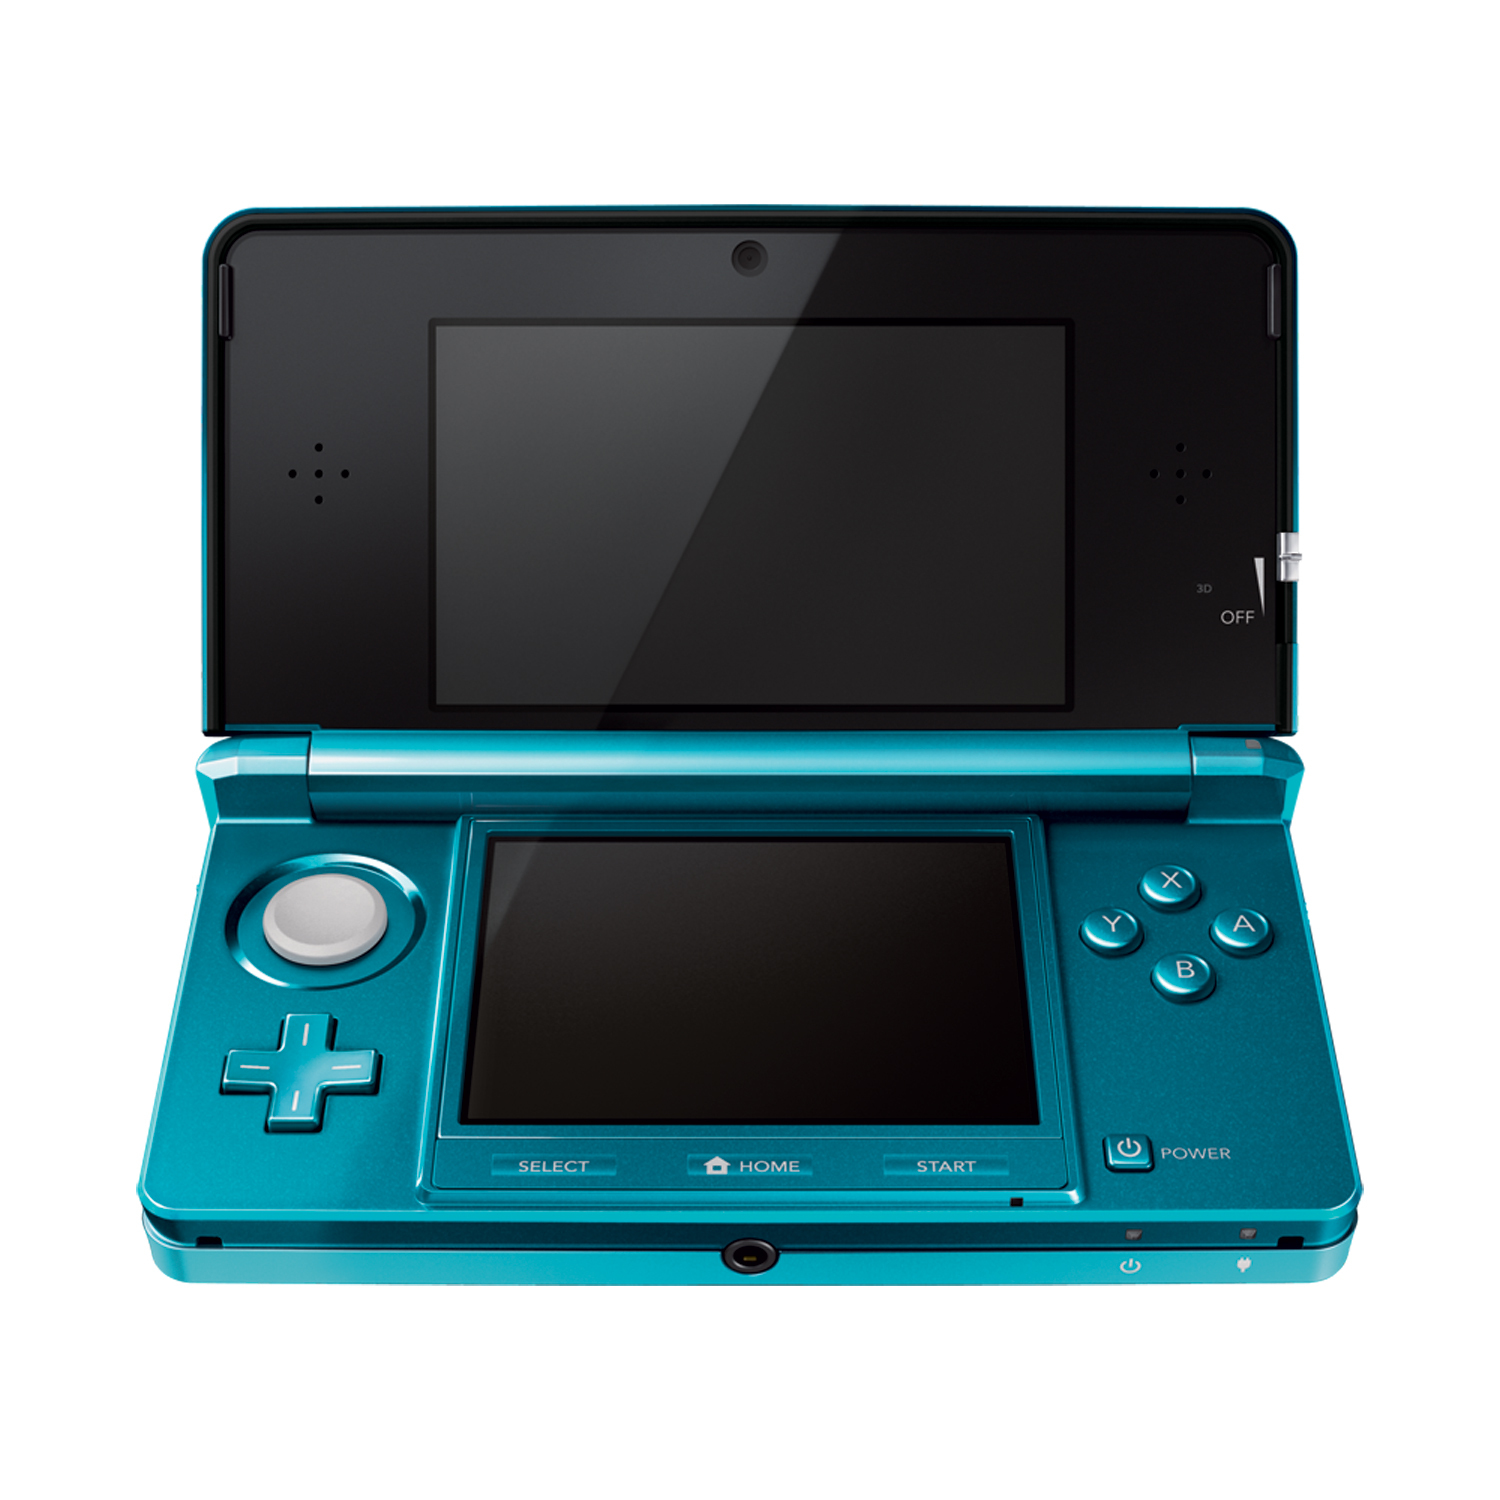 3DS Price Drops to $169.99, Great Value and New 3D Games Come Together – Review Fix